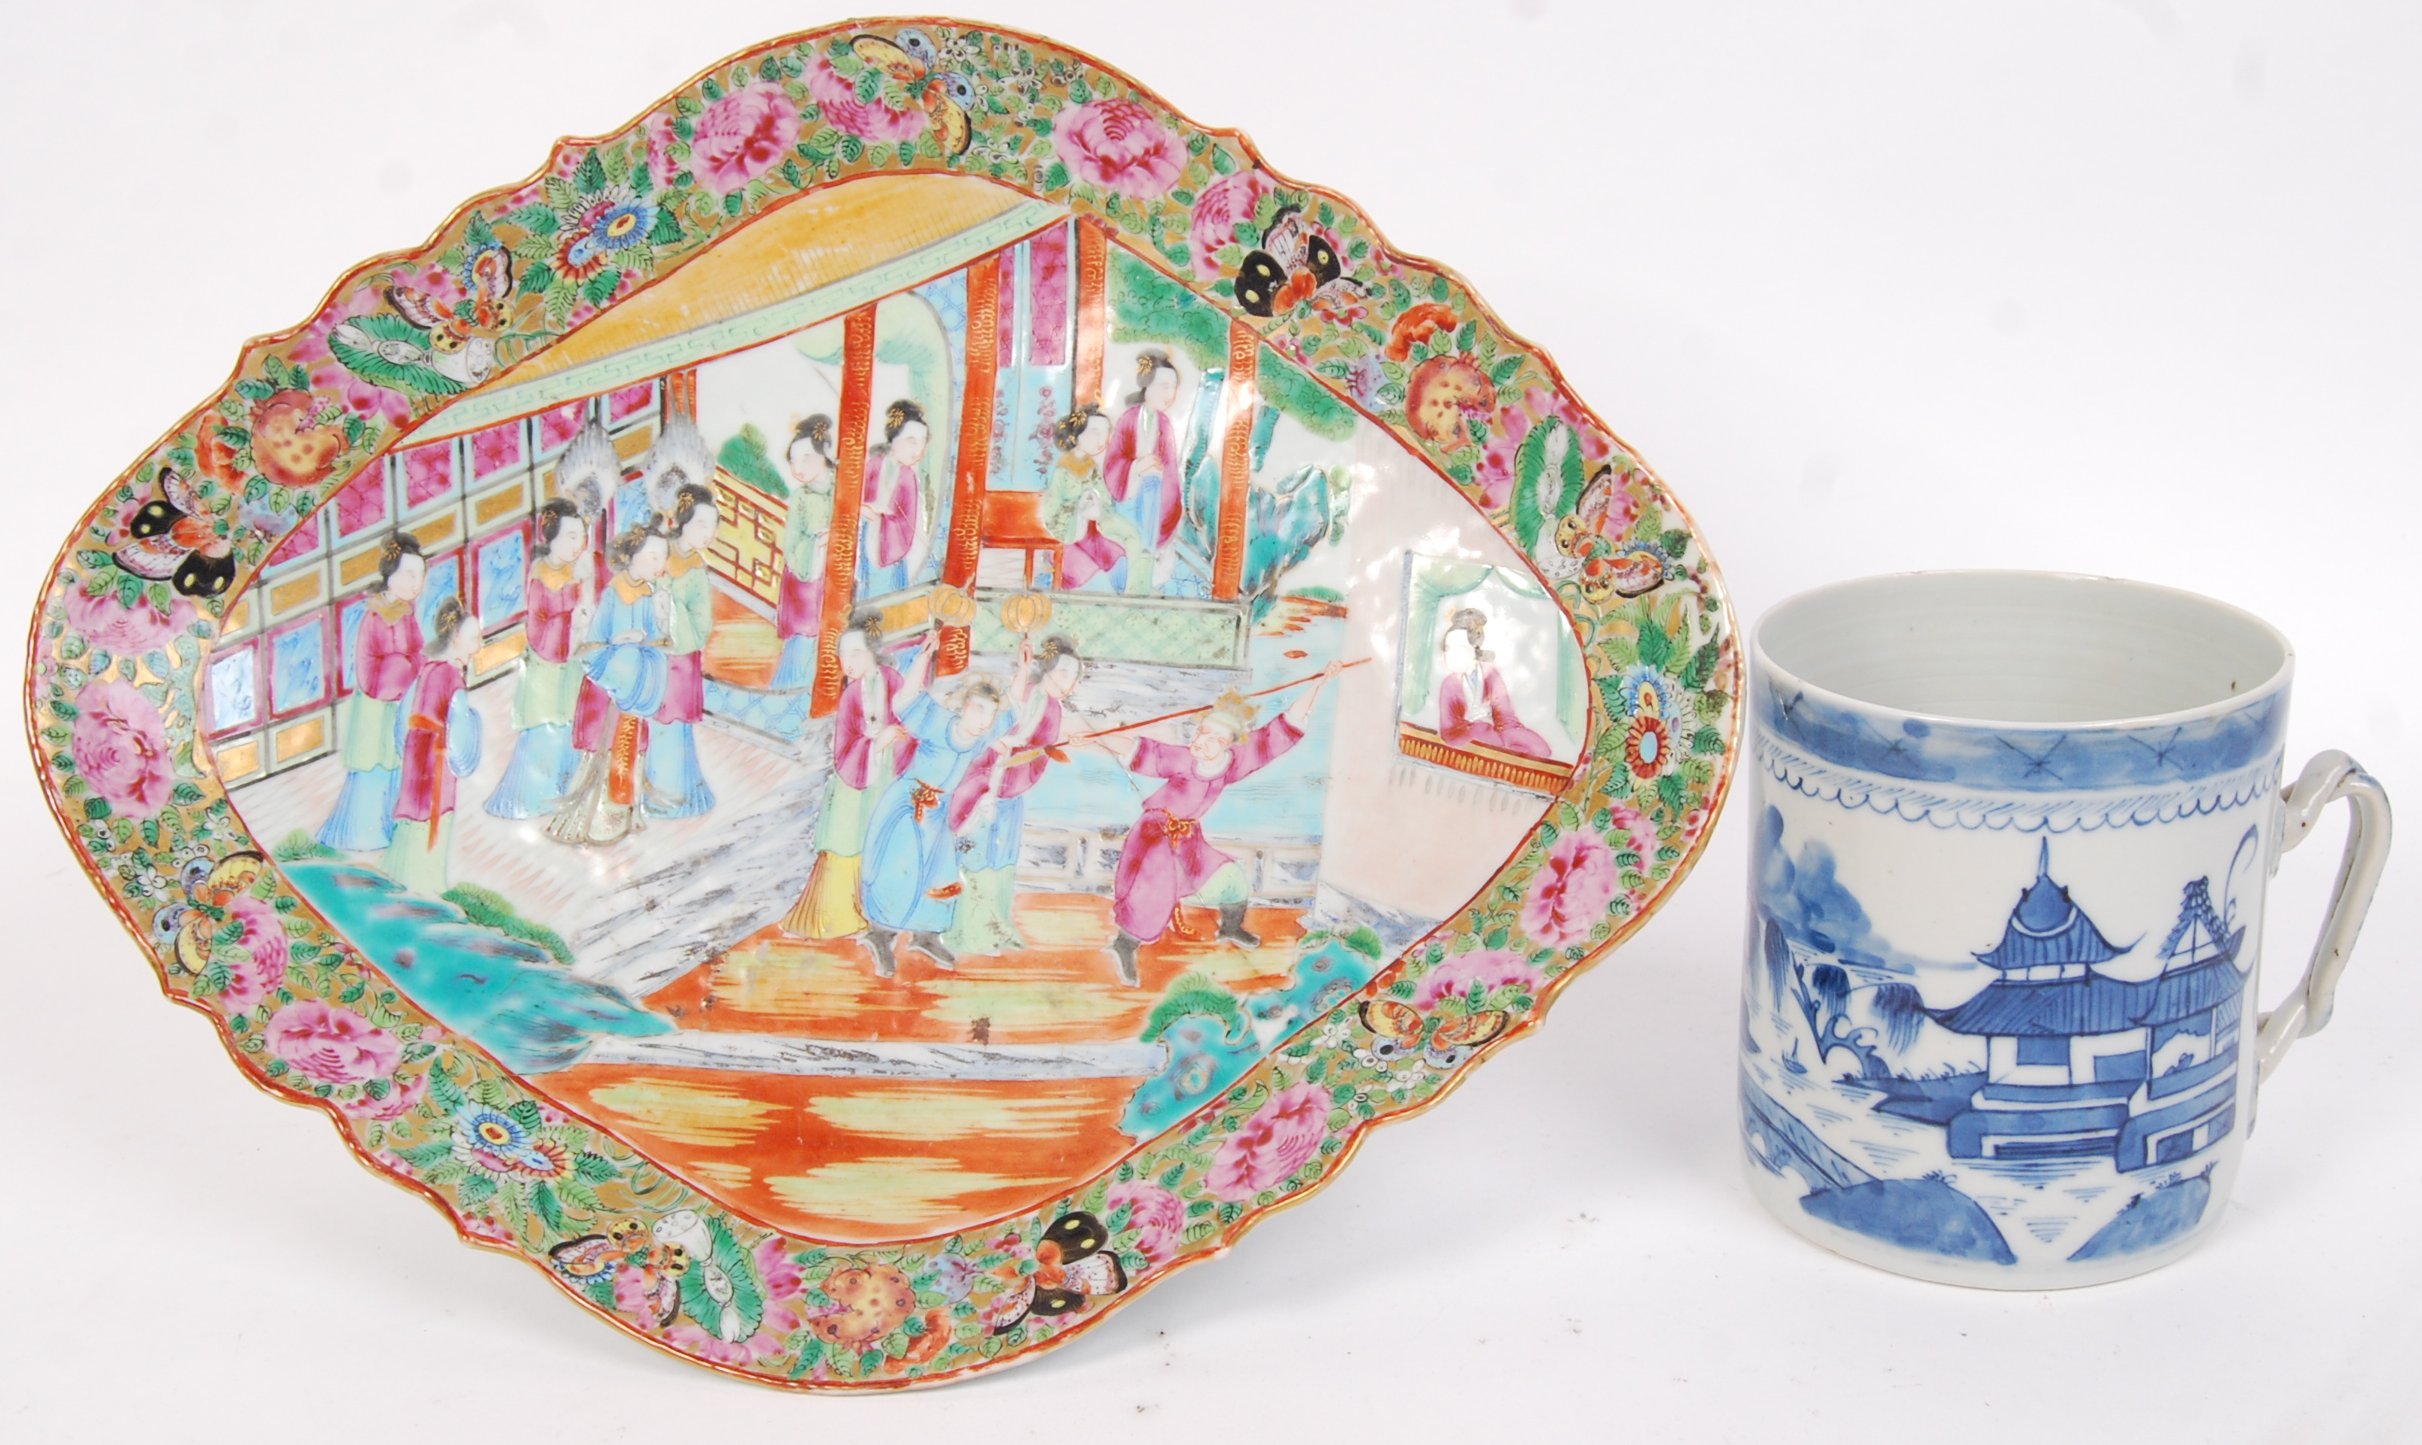 An antique 19th century Chinese Cantonese famille rose hand painted diamond shaped dish, featuring a